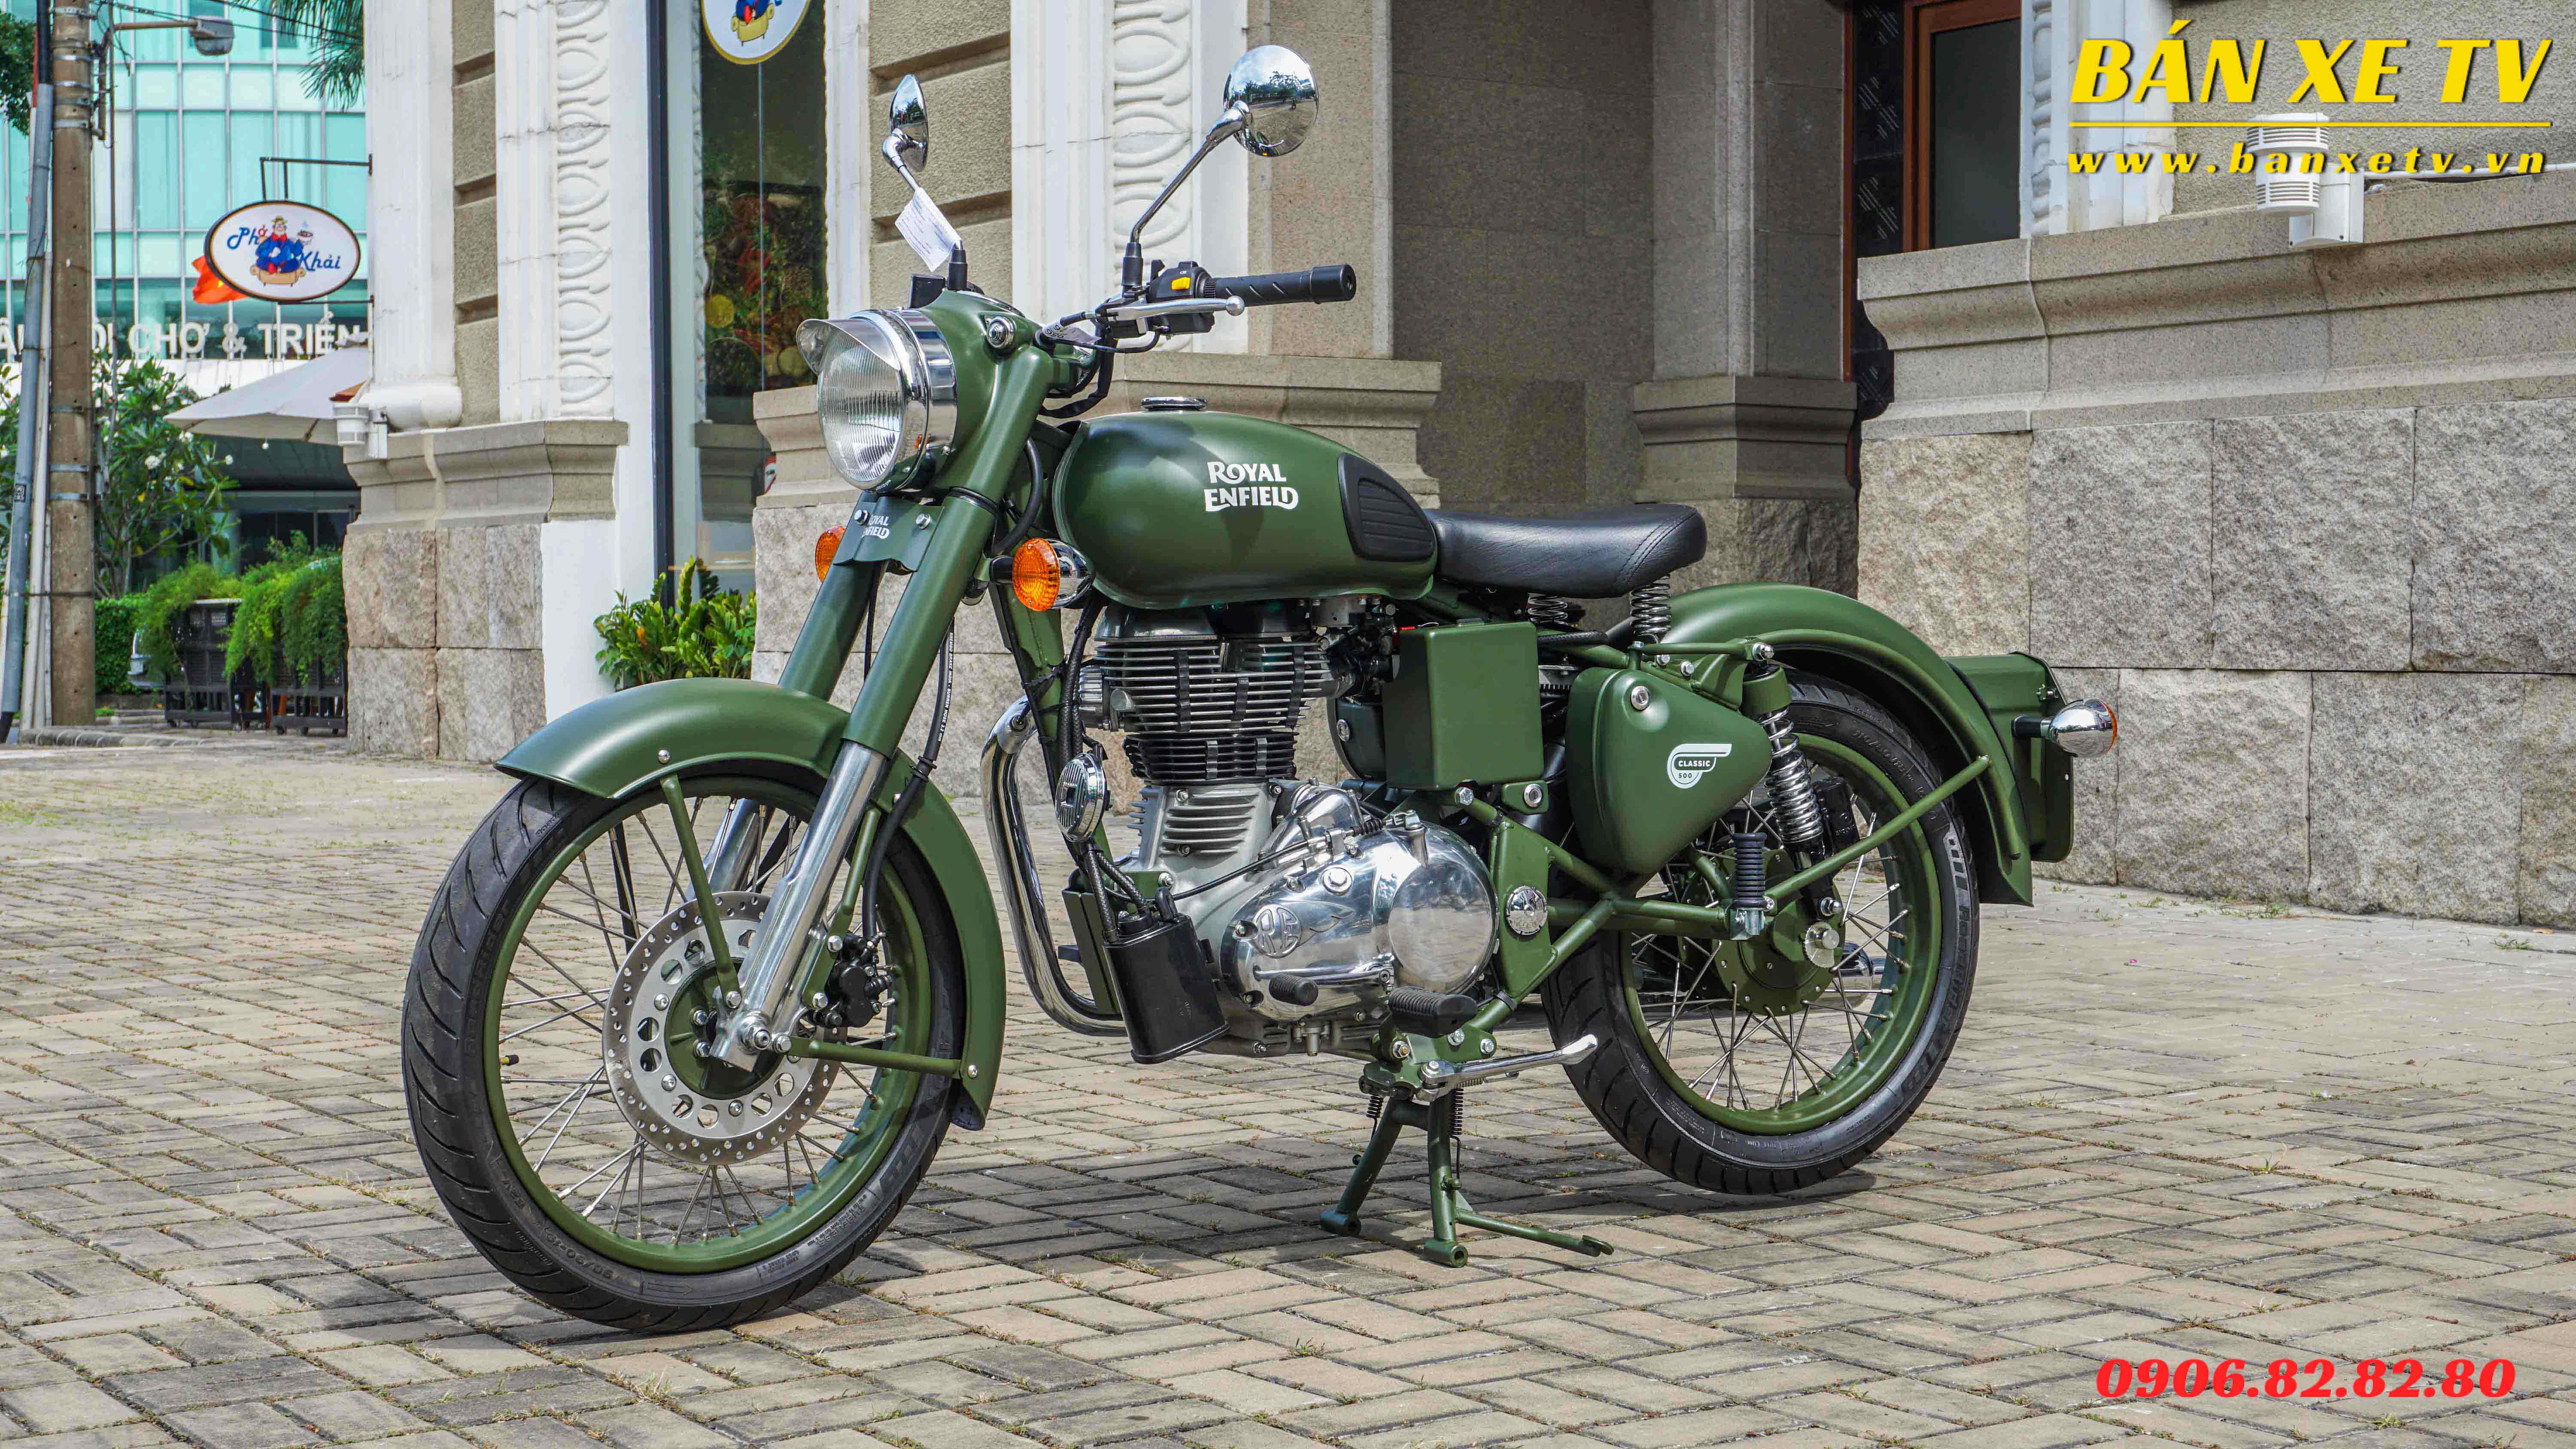 Royal Enfield Classic 500 Battle Green In Viet Nam